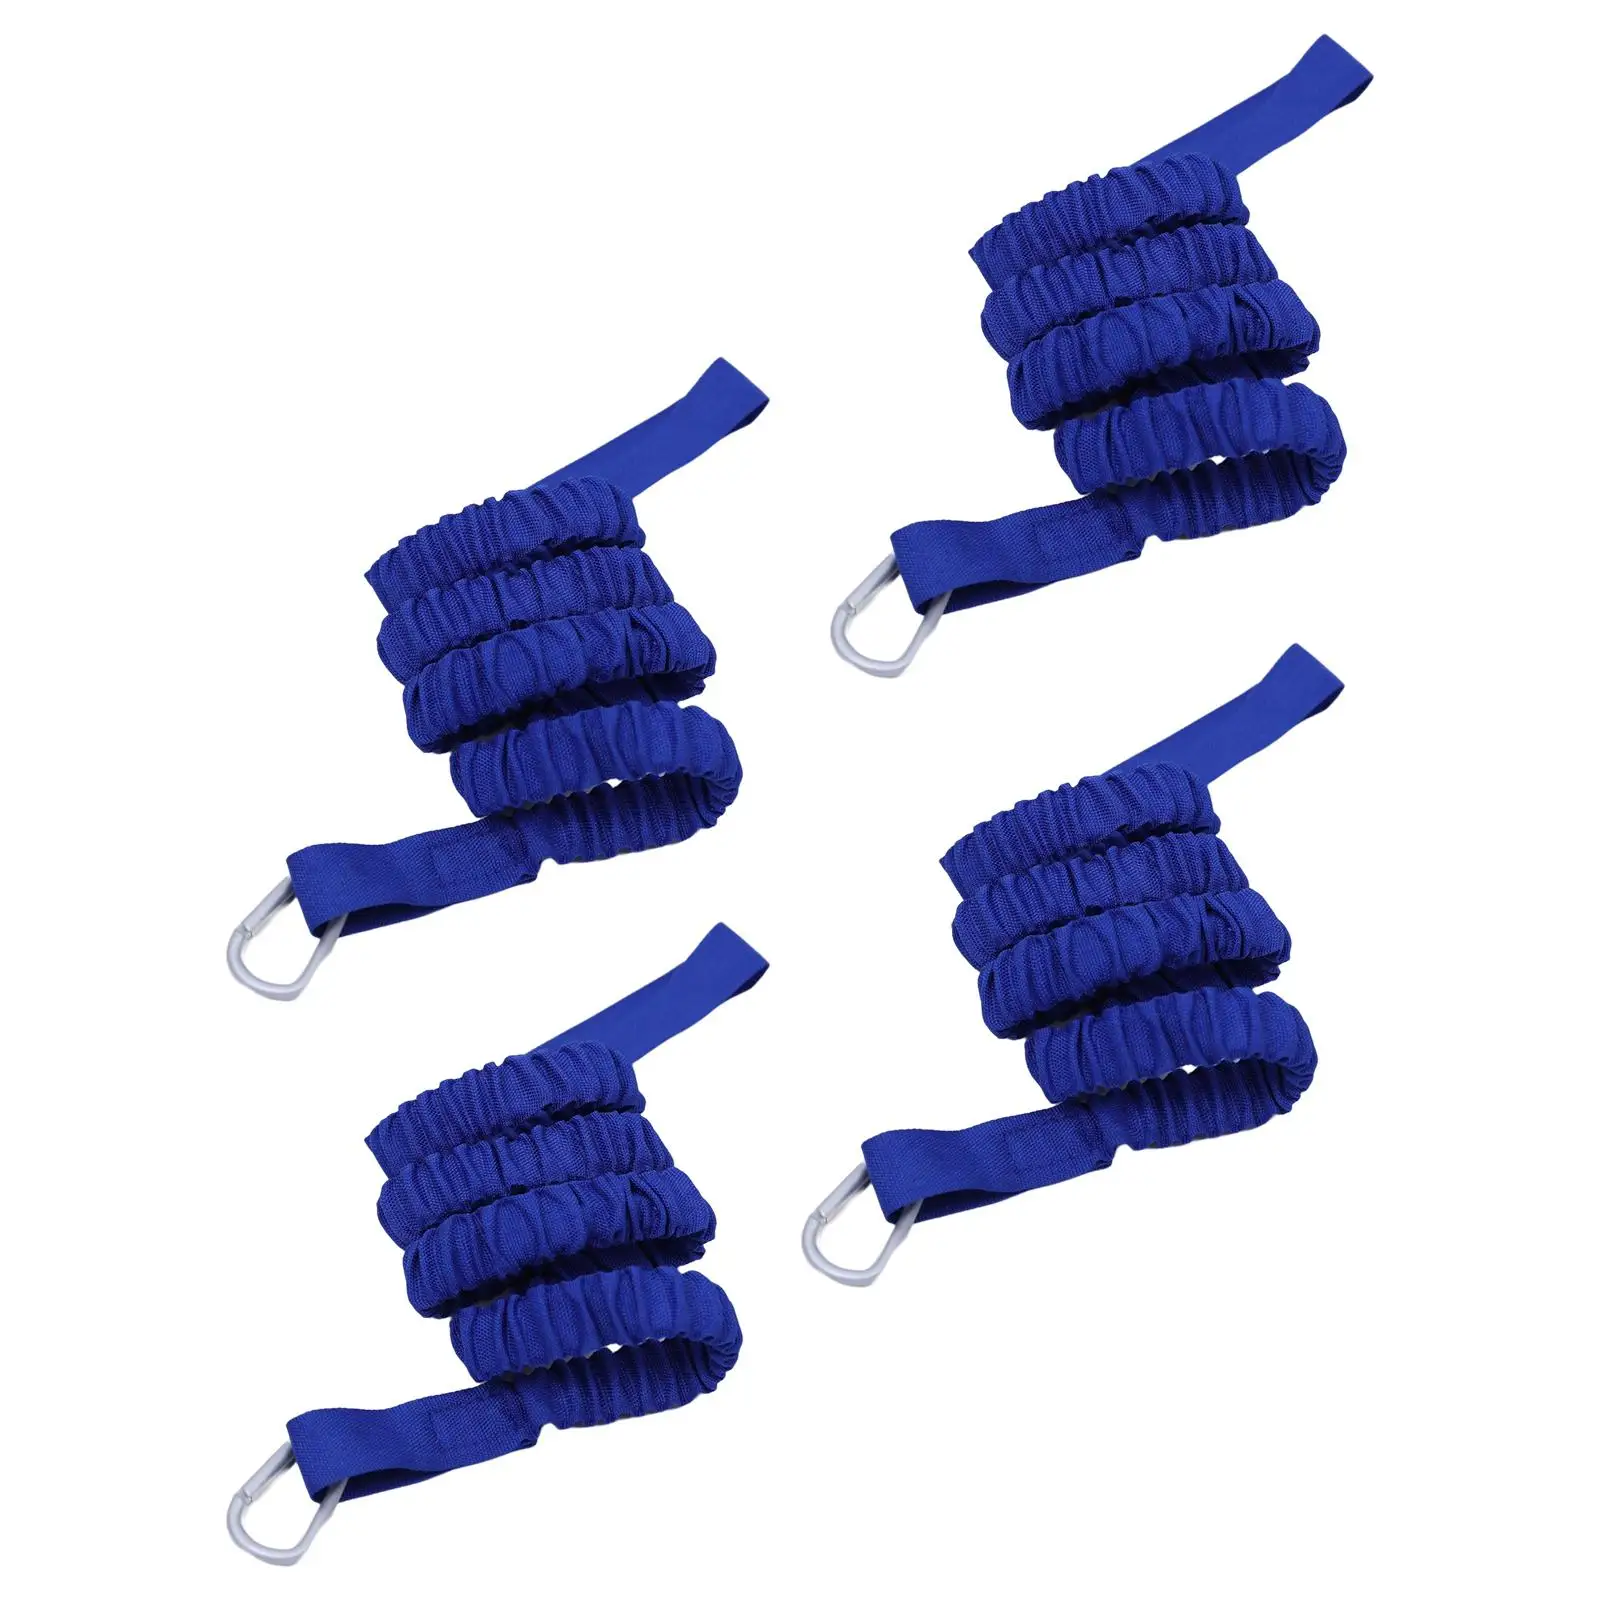  Leash Stretchable , Prevent Paddles from Falling Made of Premium Nylon Extended 5 155cm Durable